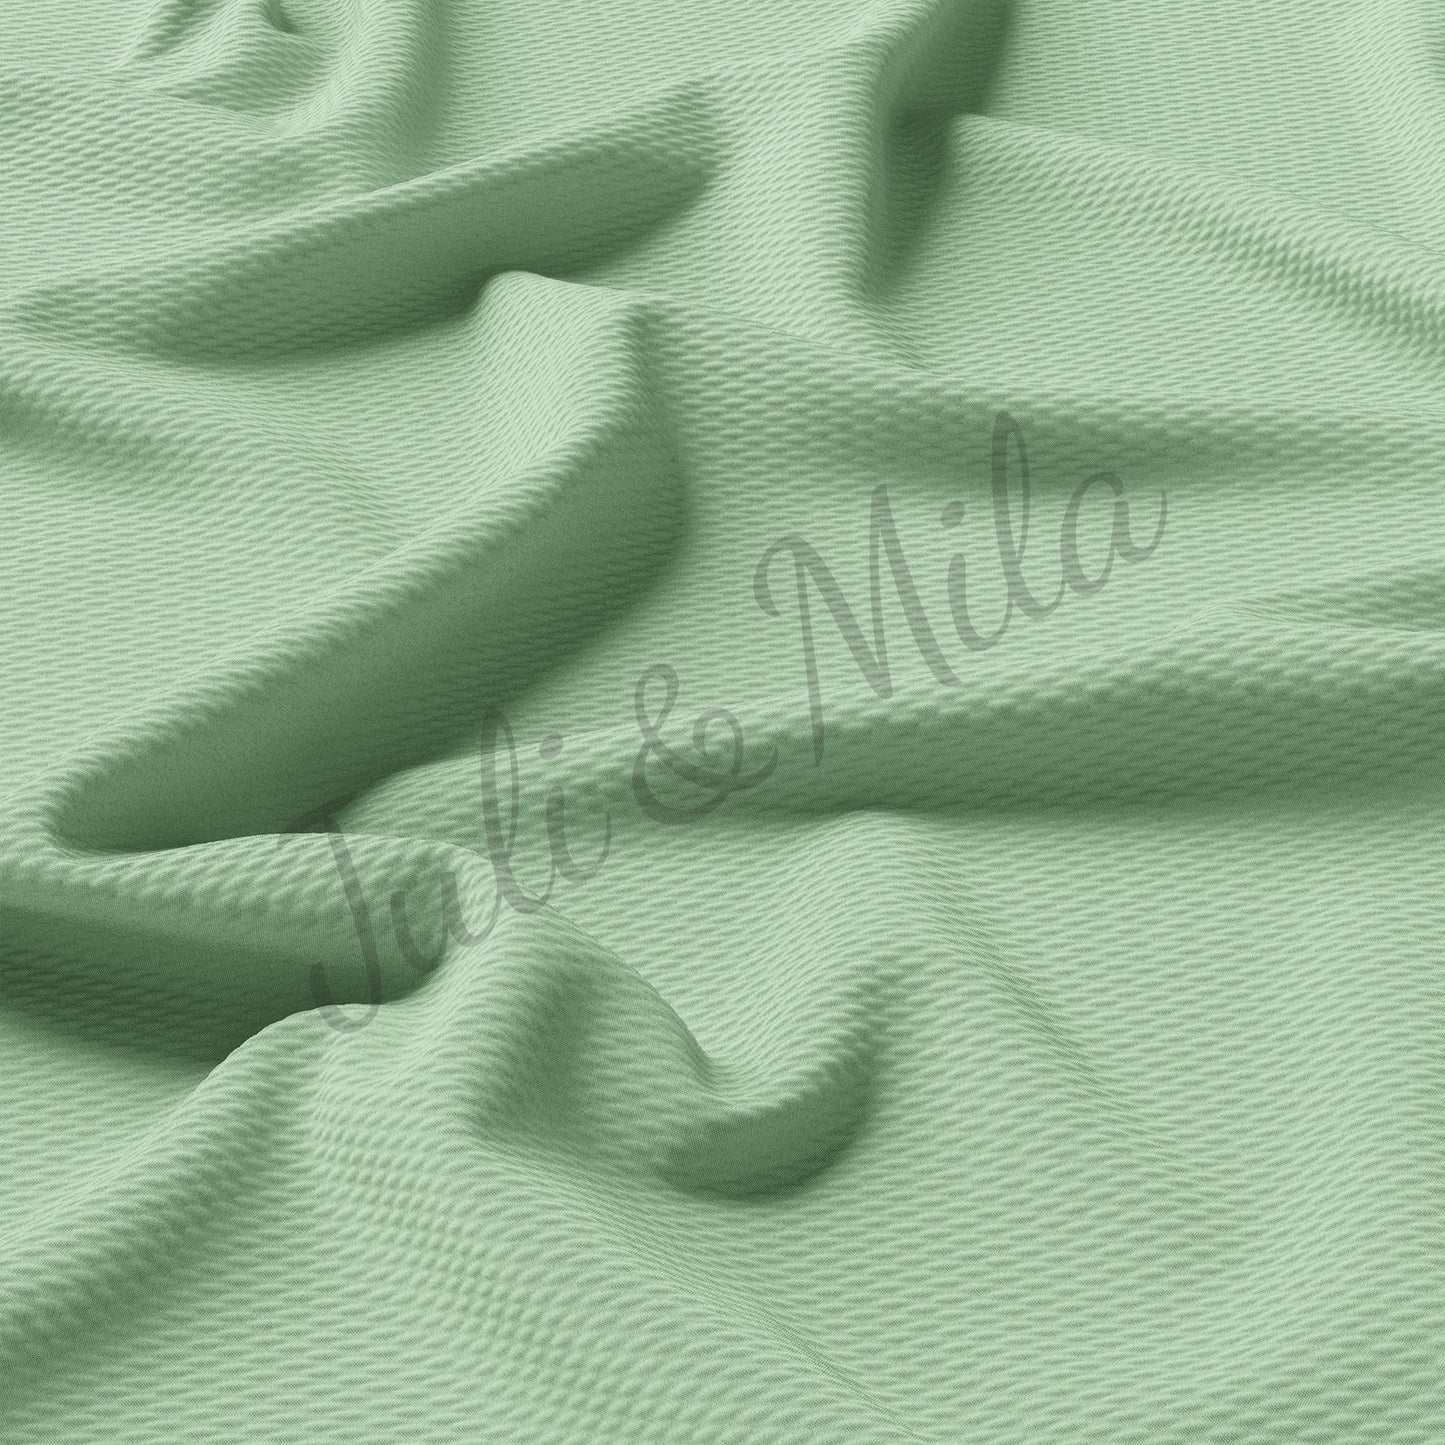 Pastel green Liverpool Bullet Textured Fabric